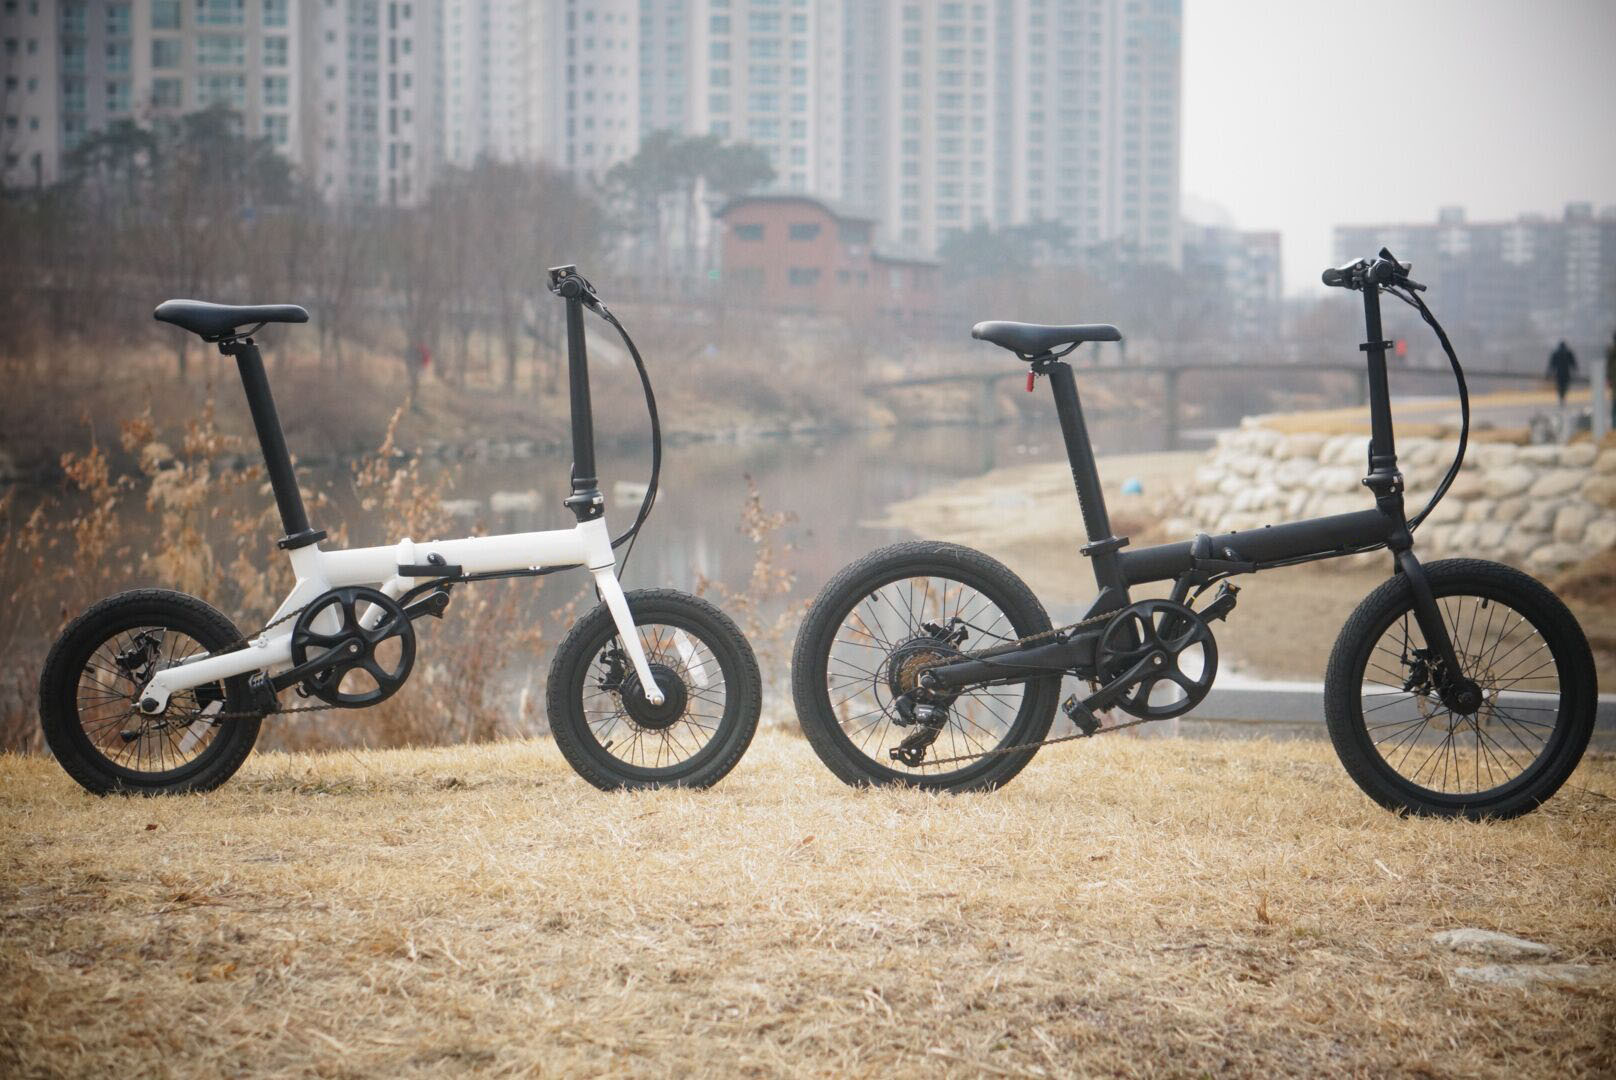 Lightest Folding Electric Bike Small Size City with Lithium Hidden Battery